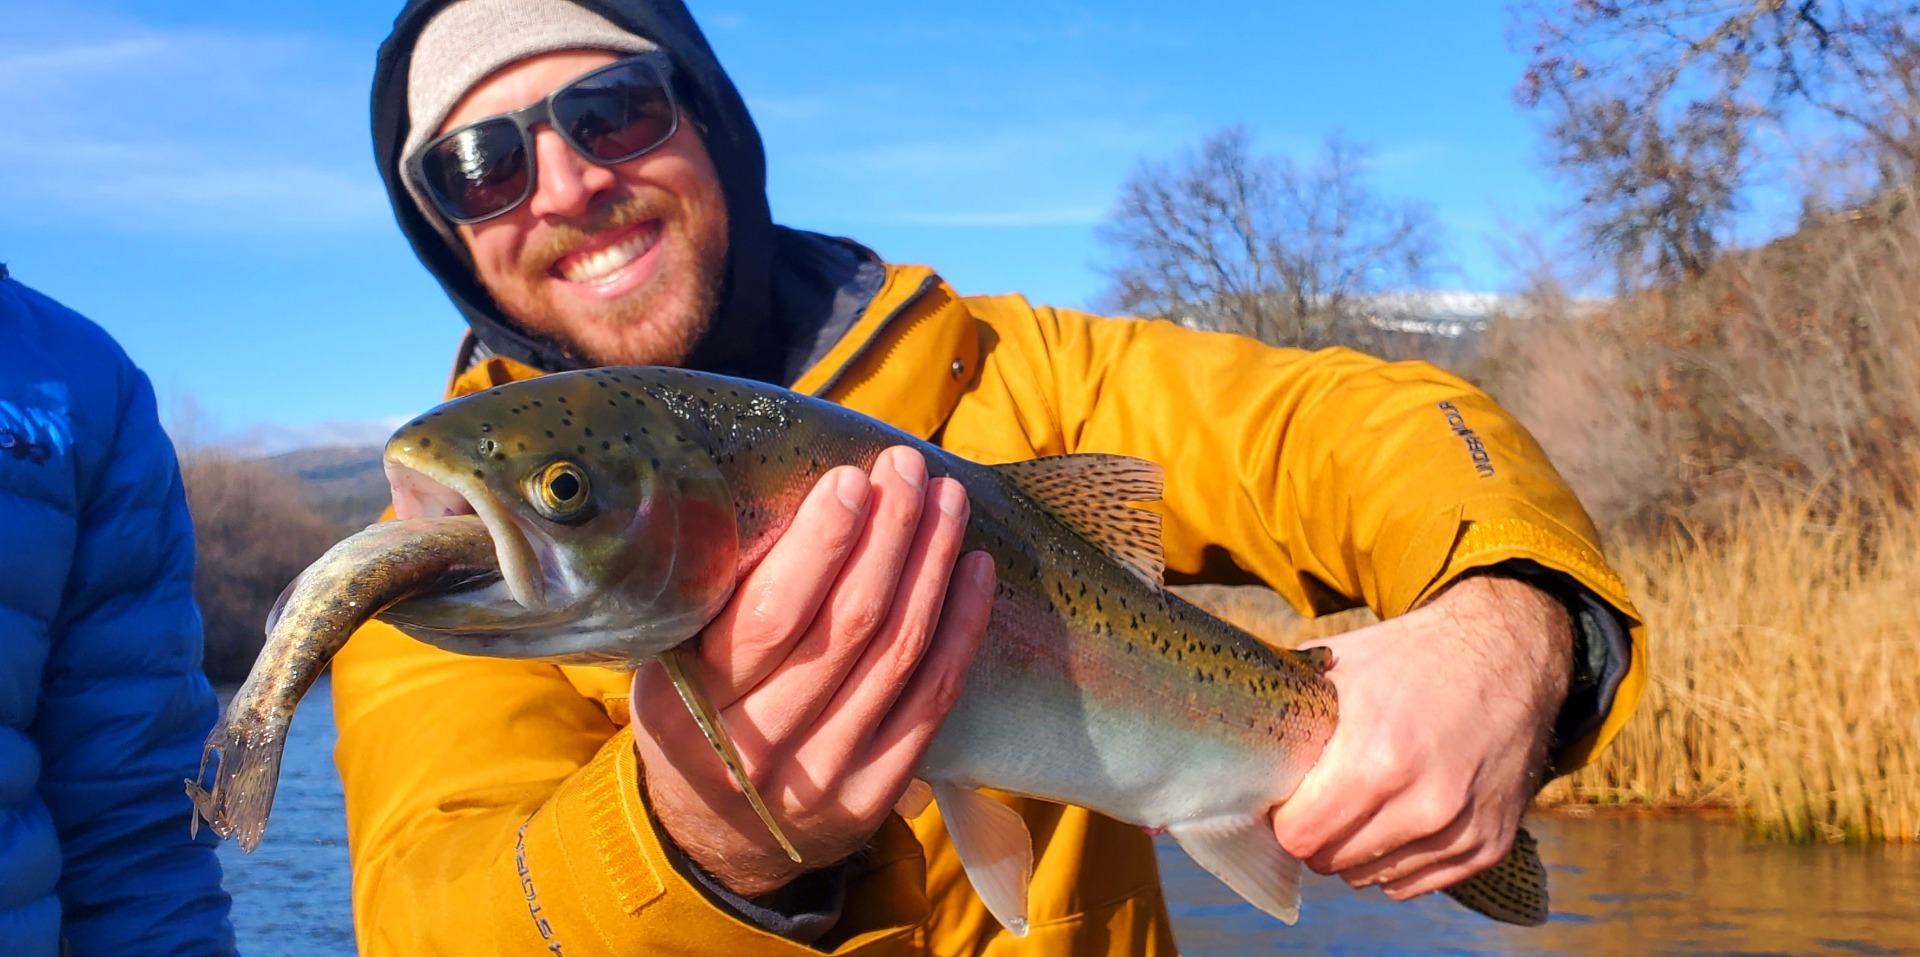 Klamath Steely Smiles, thanks to all who fished with me in 2020